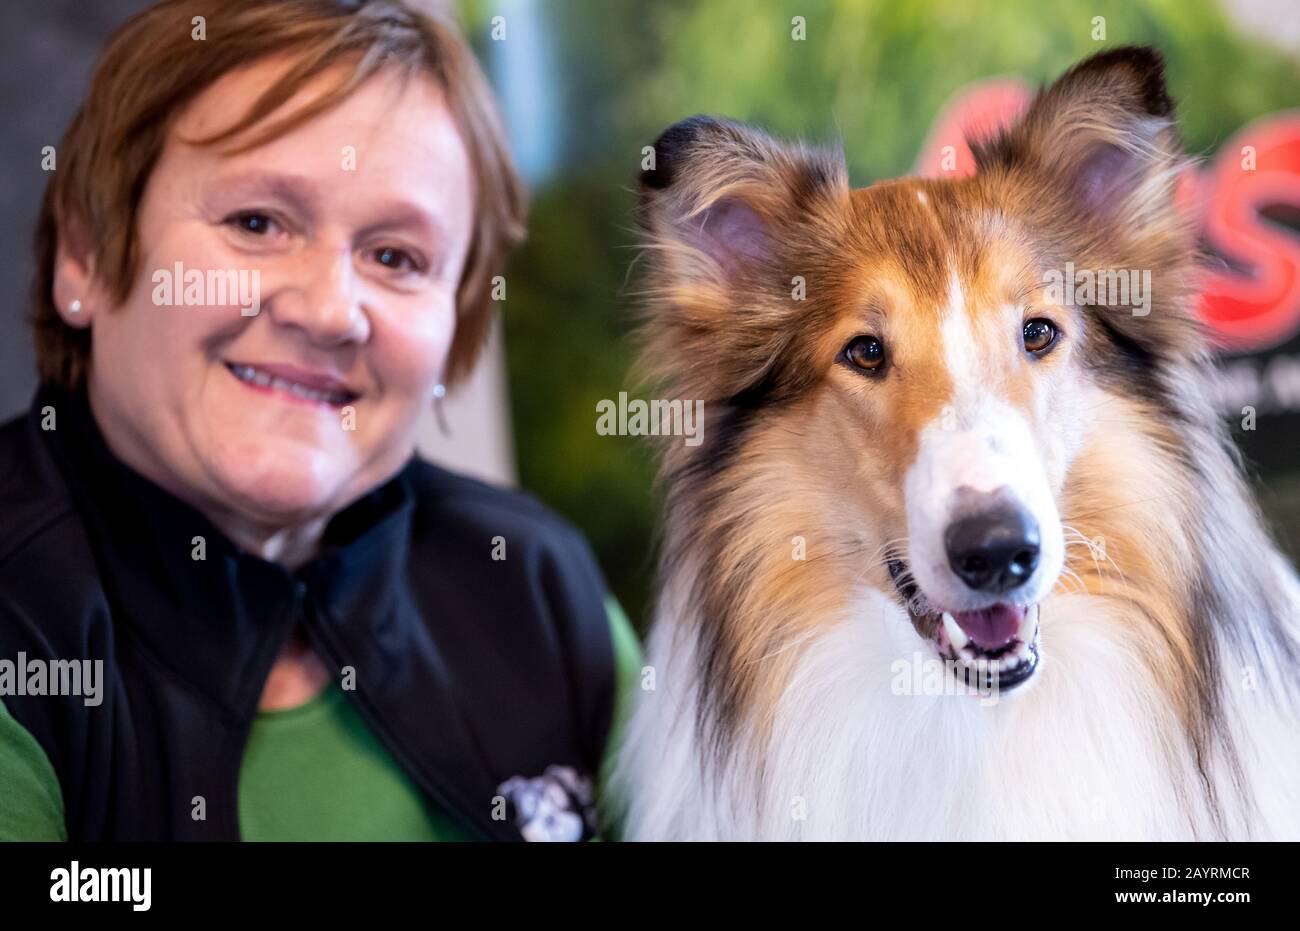 Wang Germany 29th Jan 2020 Renate Hiltl Film Animal Trainer And The Film Dog Bandit Recorded At The Film Animal Ranch Bandit Plays In The Movie Lassie An Adventurous Journey Lassie